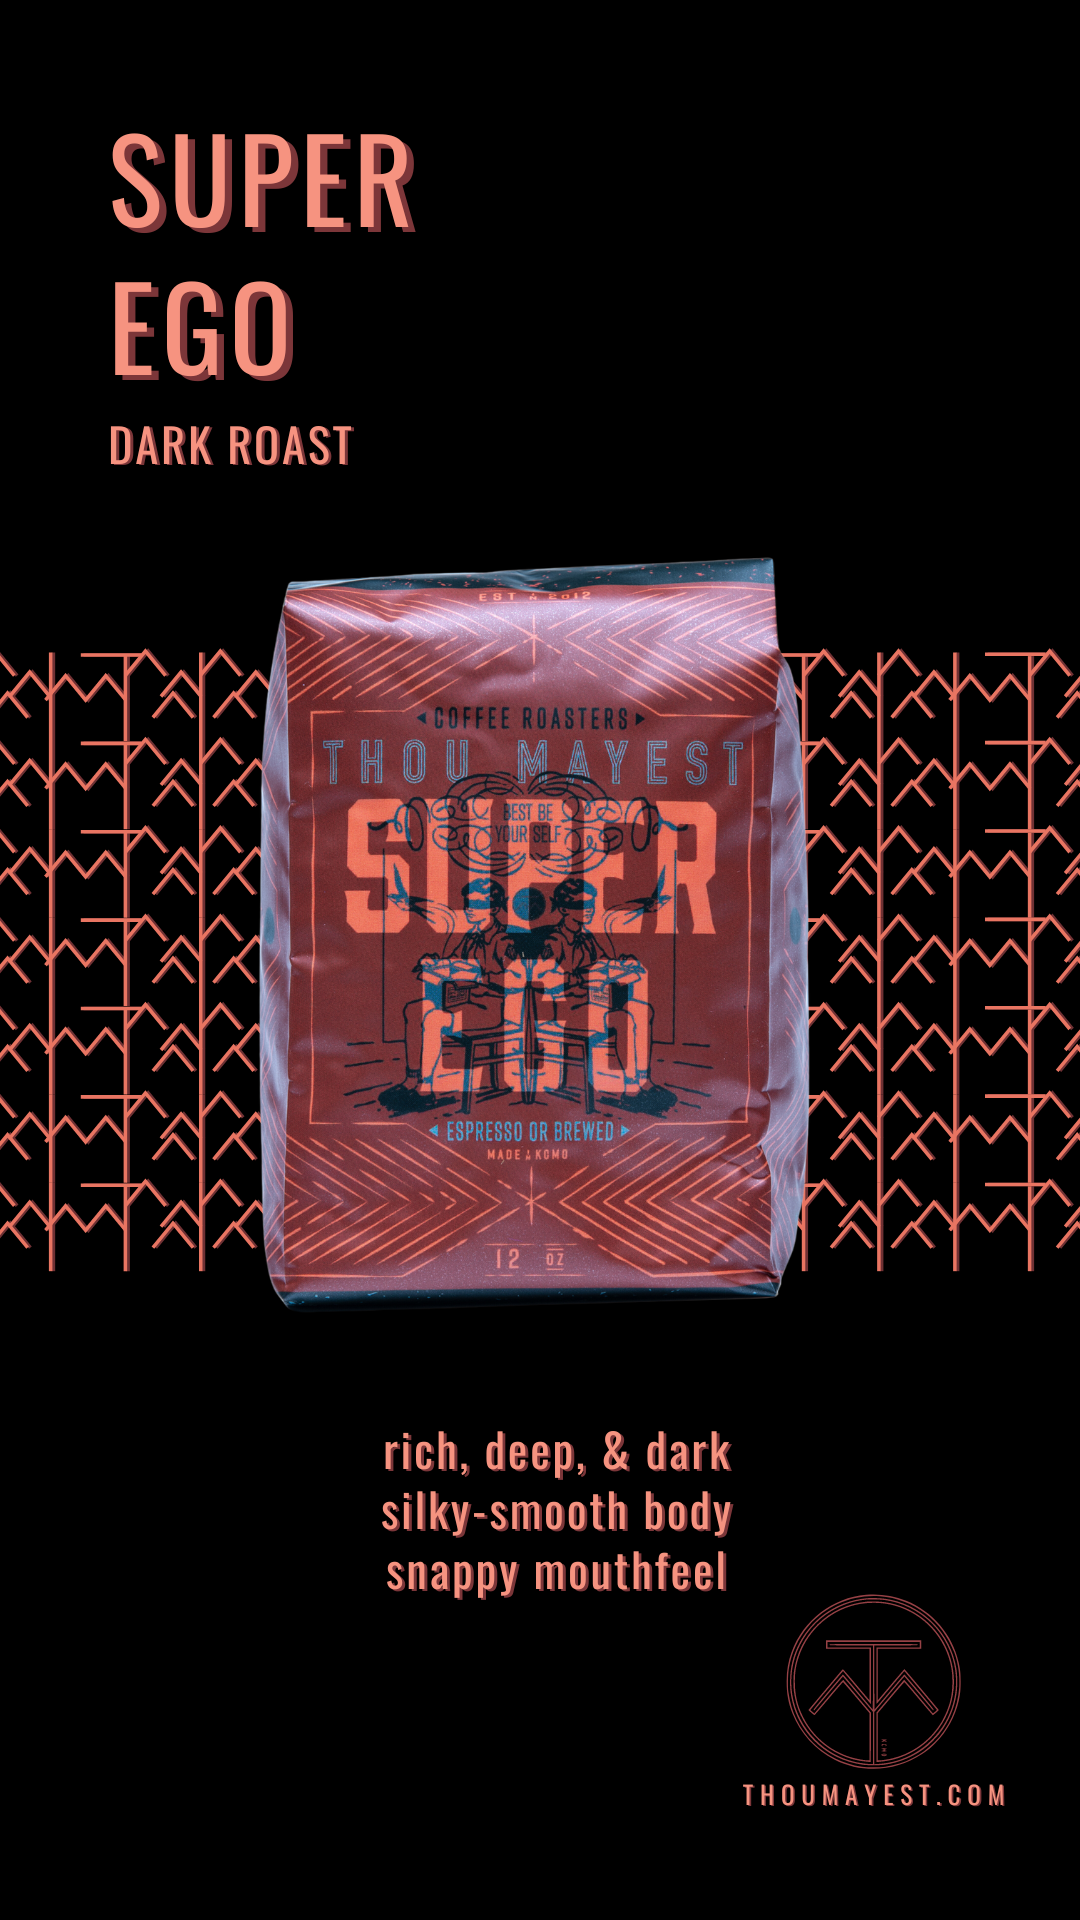 Image of Super Ego 12oz bag of coffee with description: Dark roast. Rich, deep, &amp; dark. Silky-smooth body. Snappy mouthfeel.